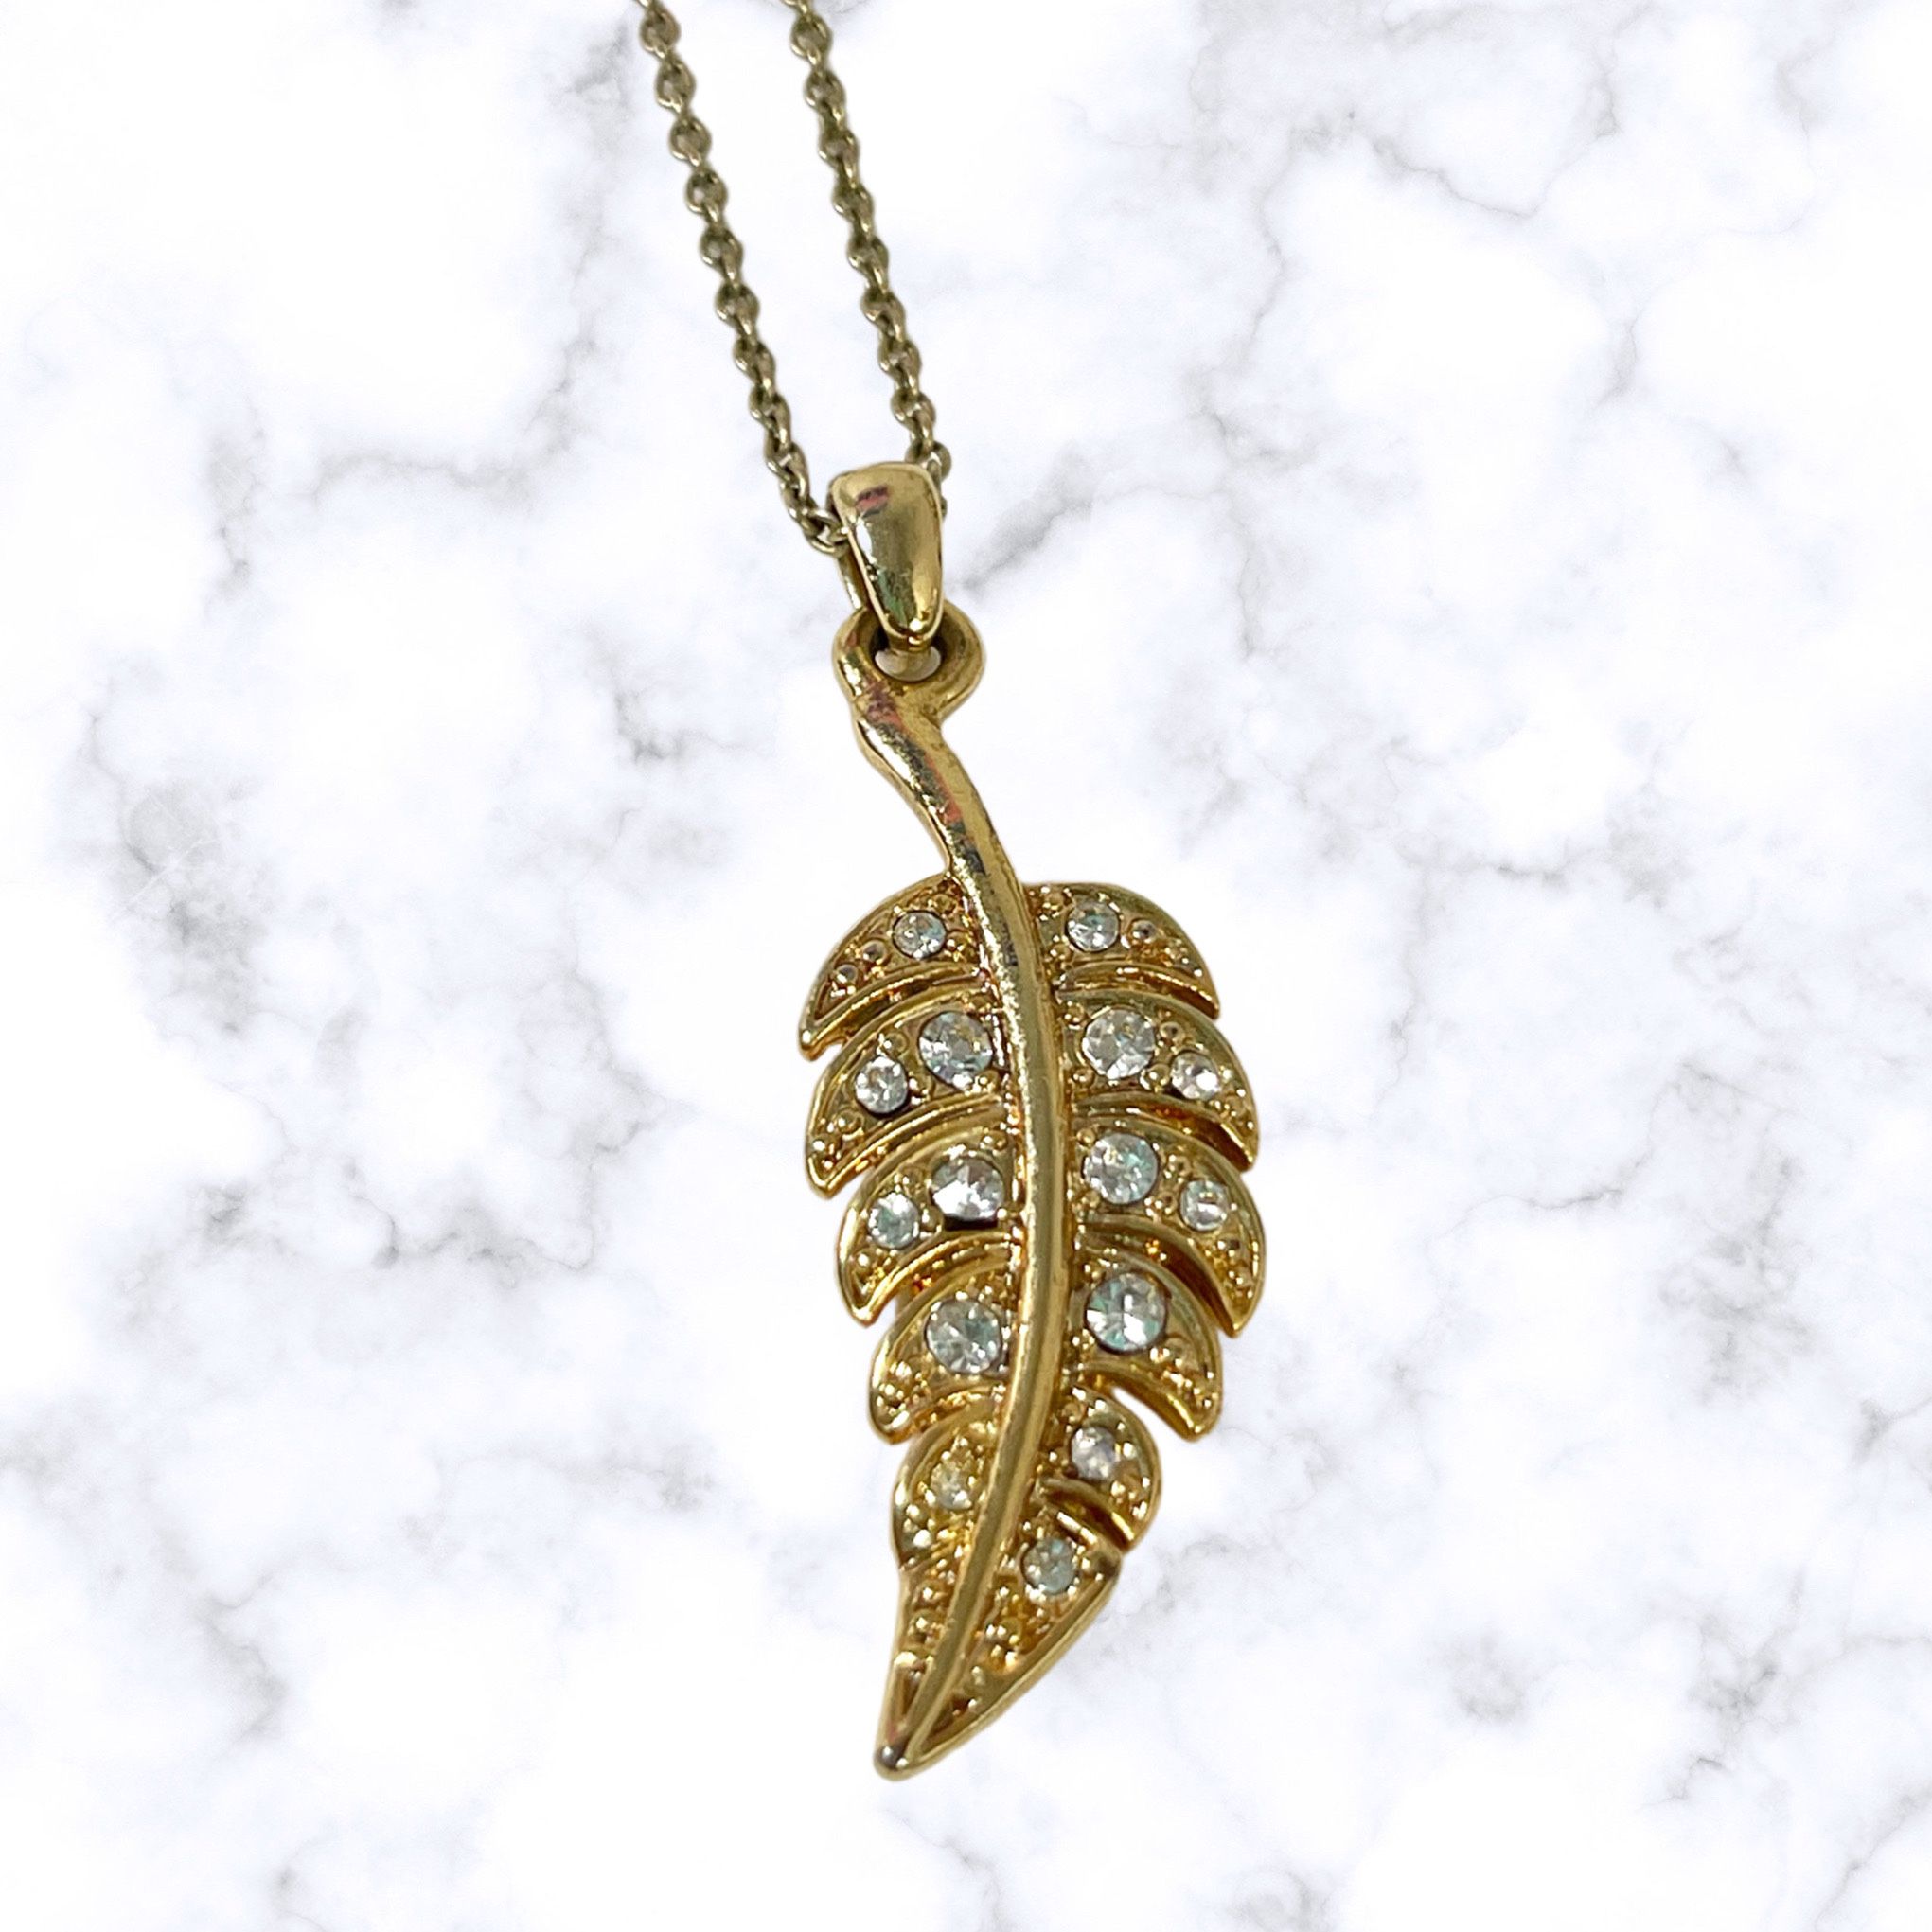 Vintage Avon Gold Tone Rhinestone Leaf 17” Necklace with Removable Extension